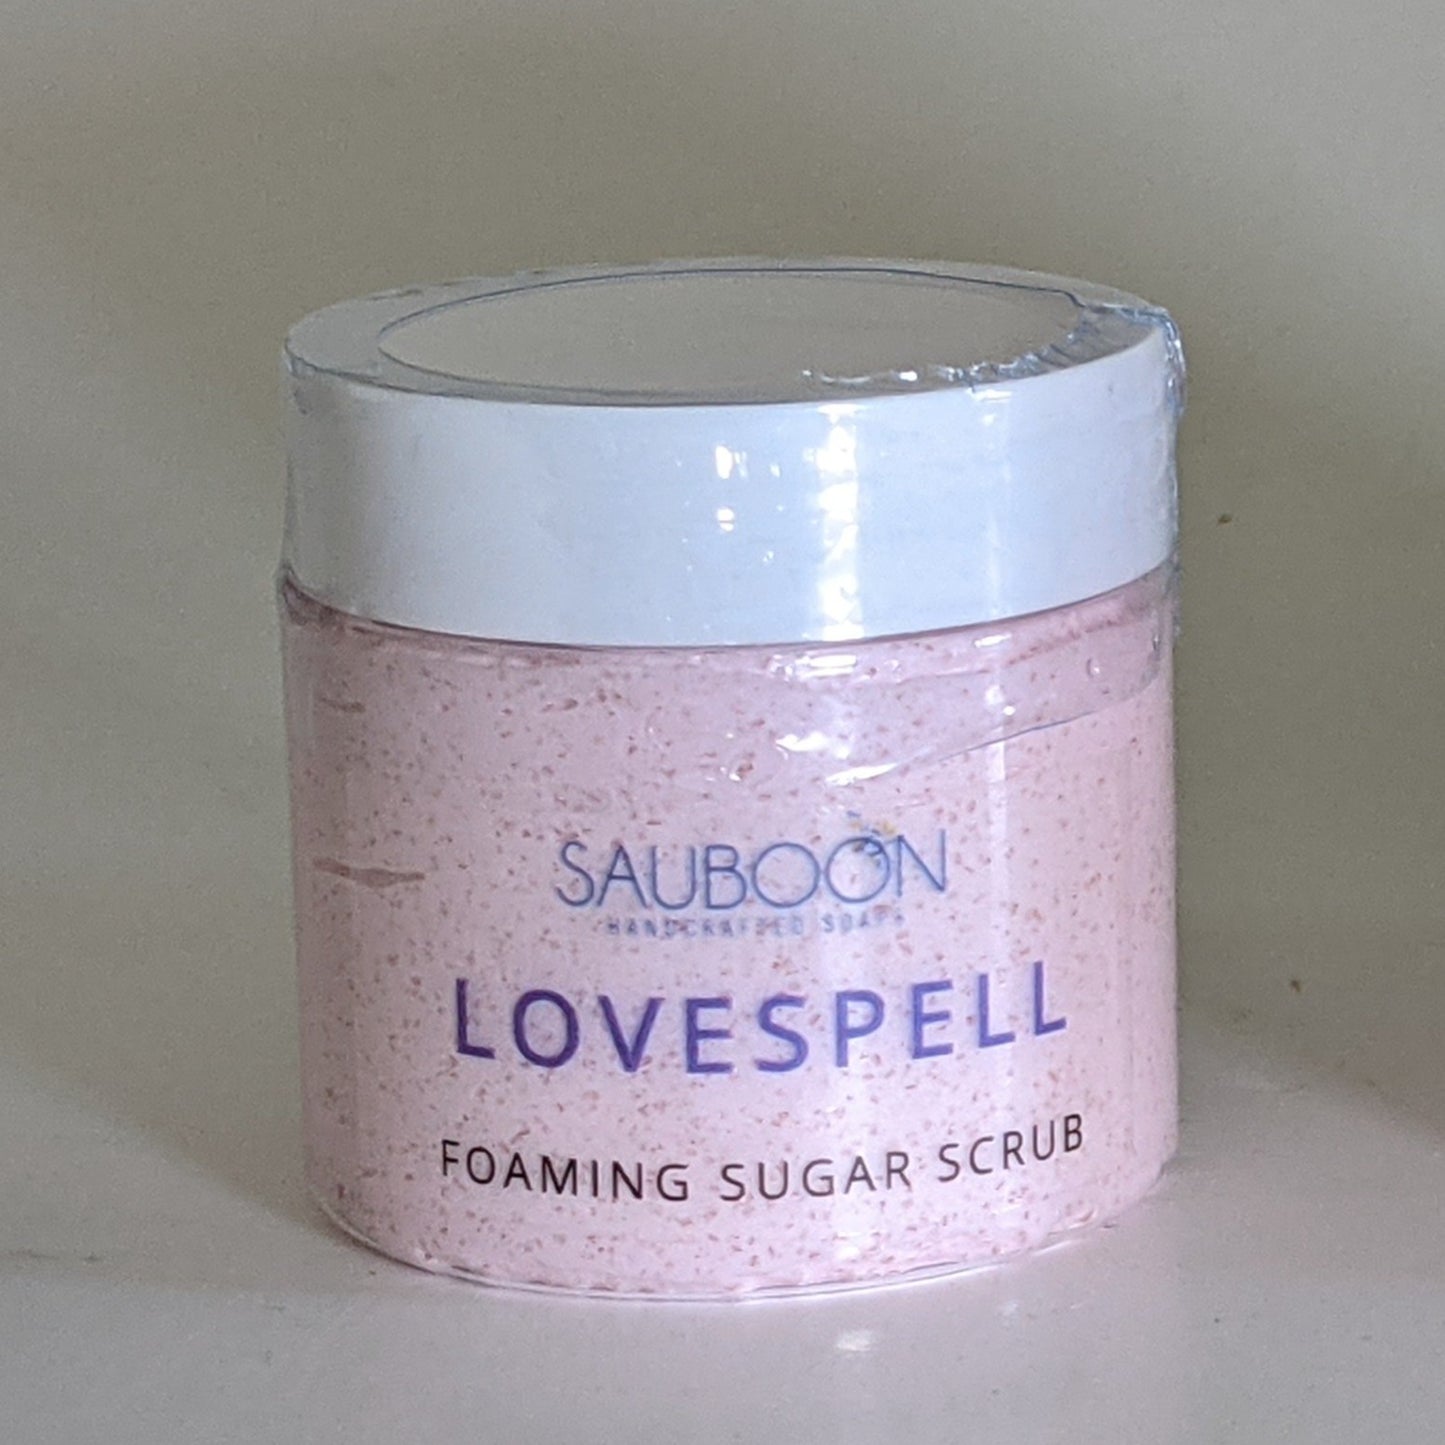 Love Spell Foaming Sugar Scrubs. made locally here in San Diego in small batches.  Highest quality ingredients used to give the best lather, nourishment, exfoliation and cleansing experience.